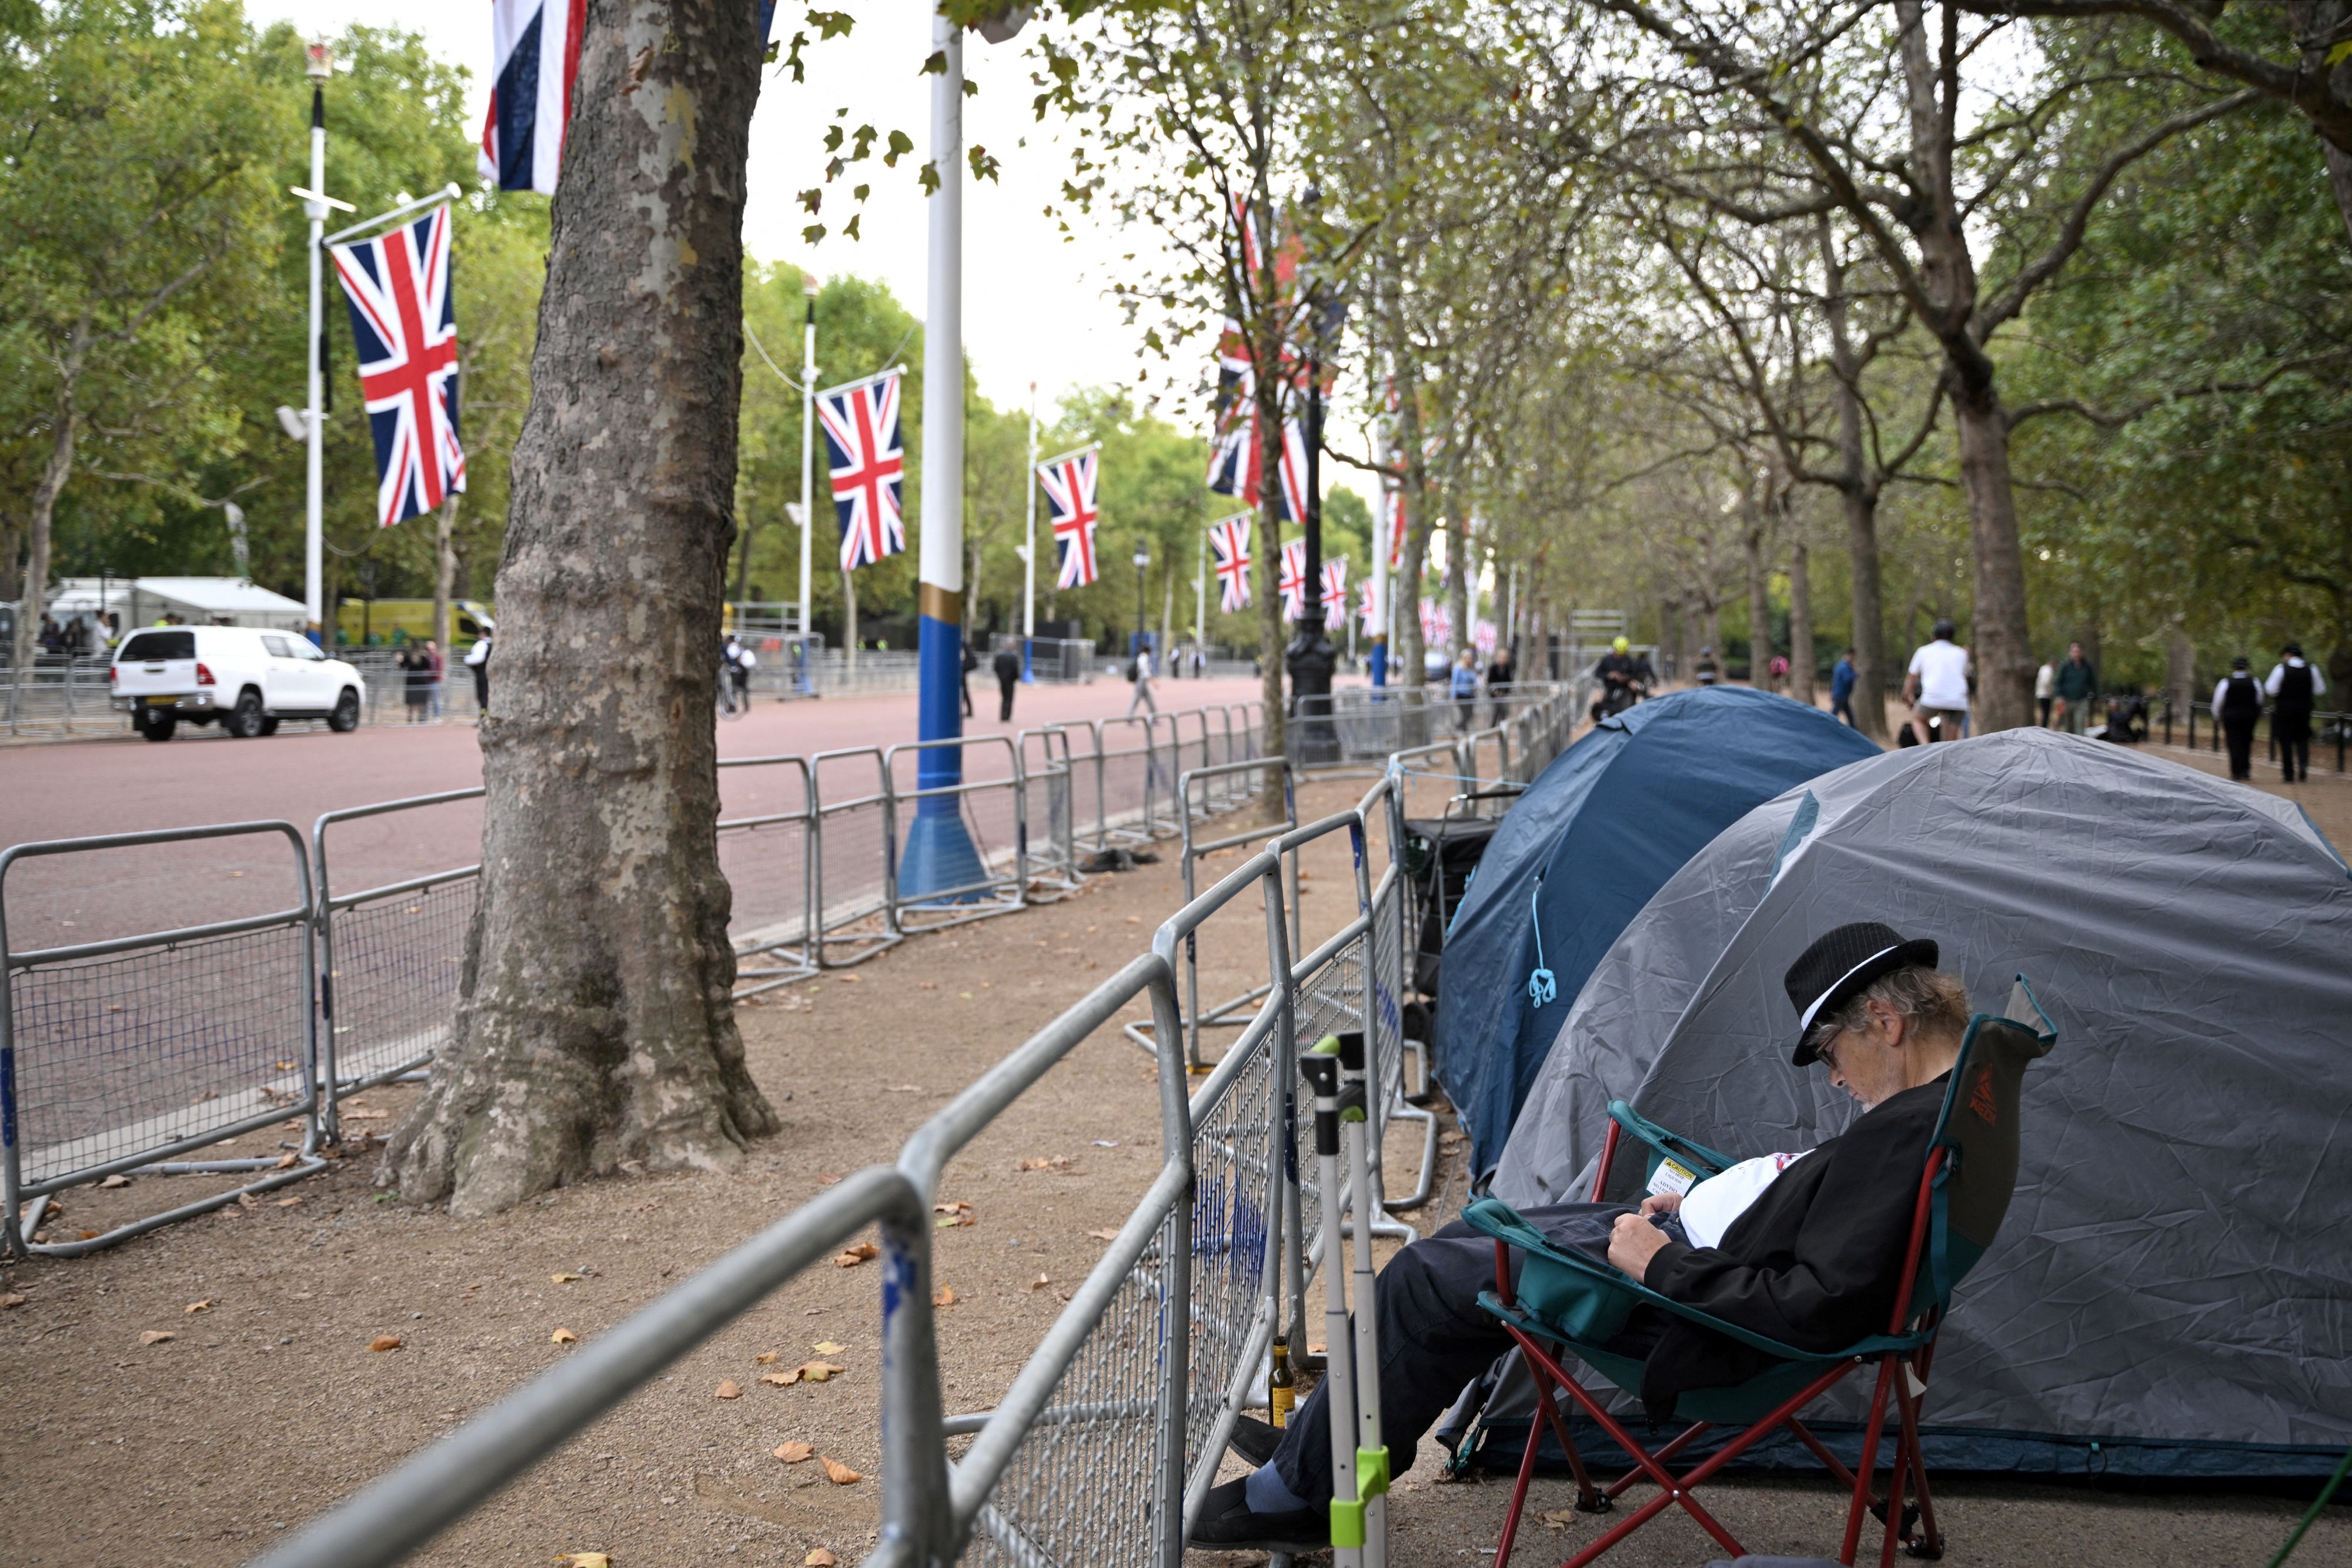 Mourners have already begun setting up tents to view the Queen’s coffin